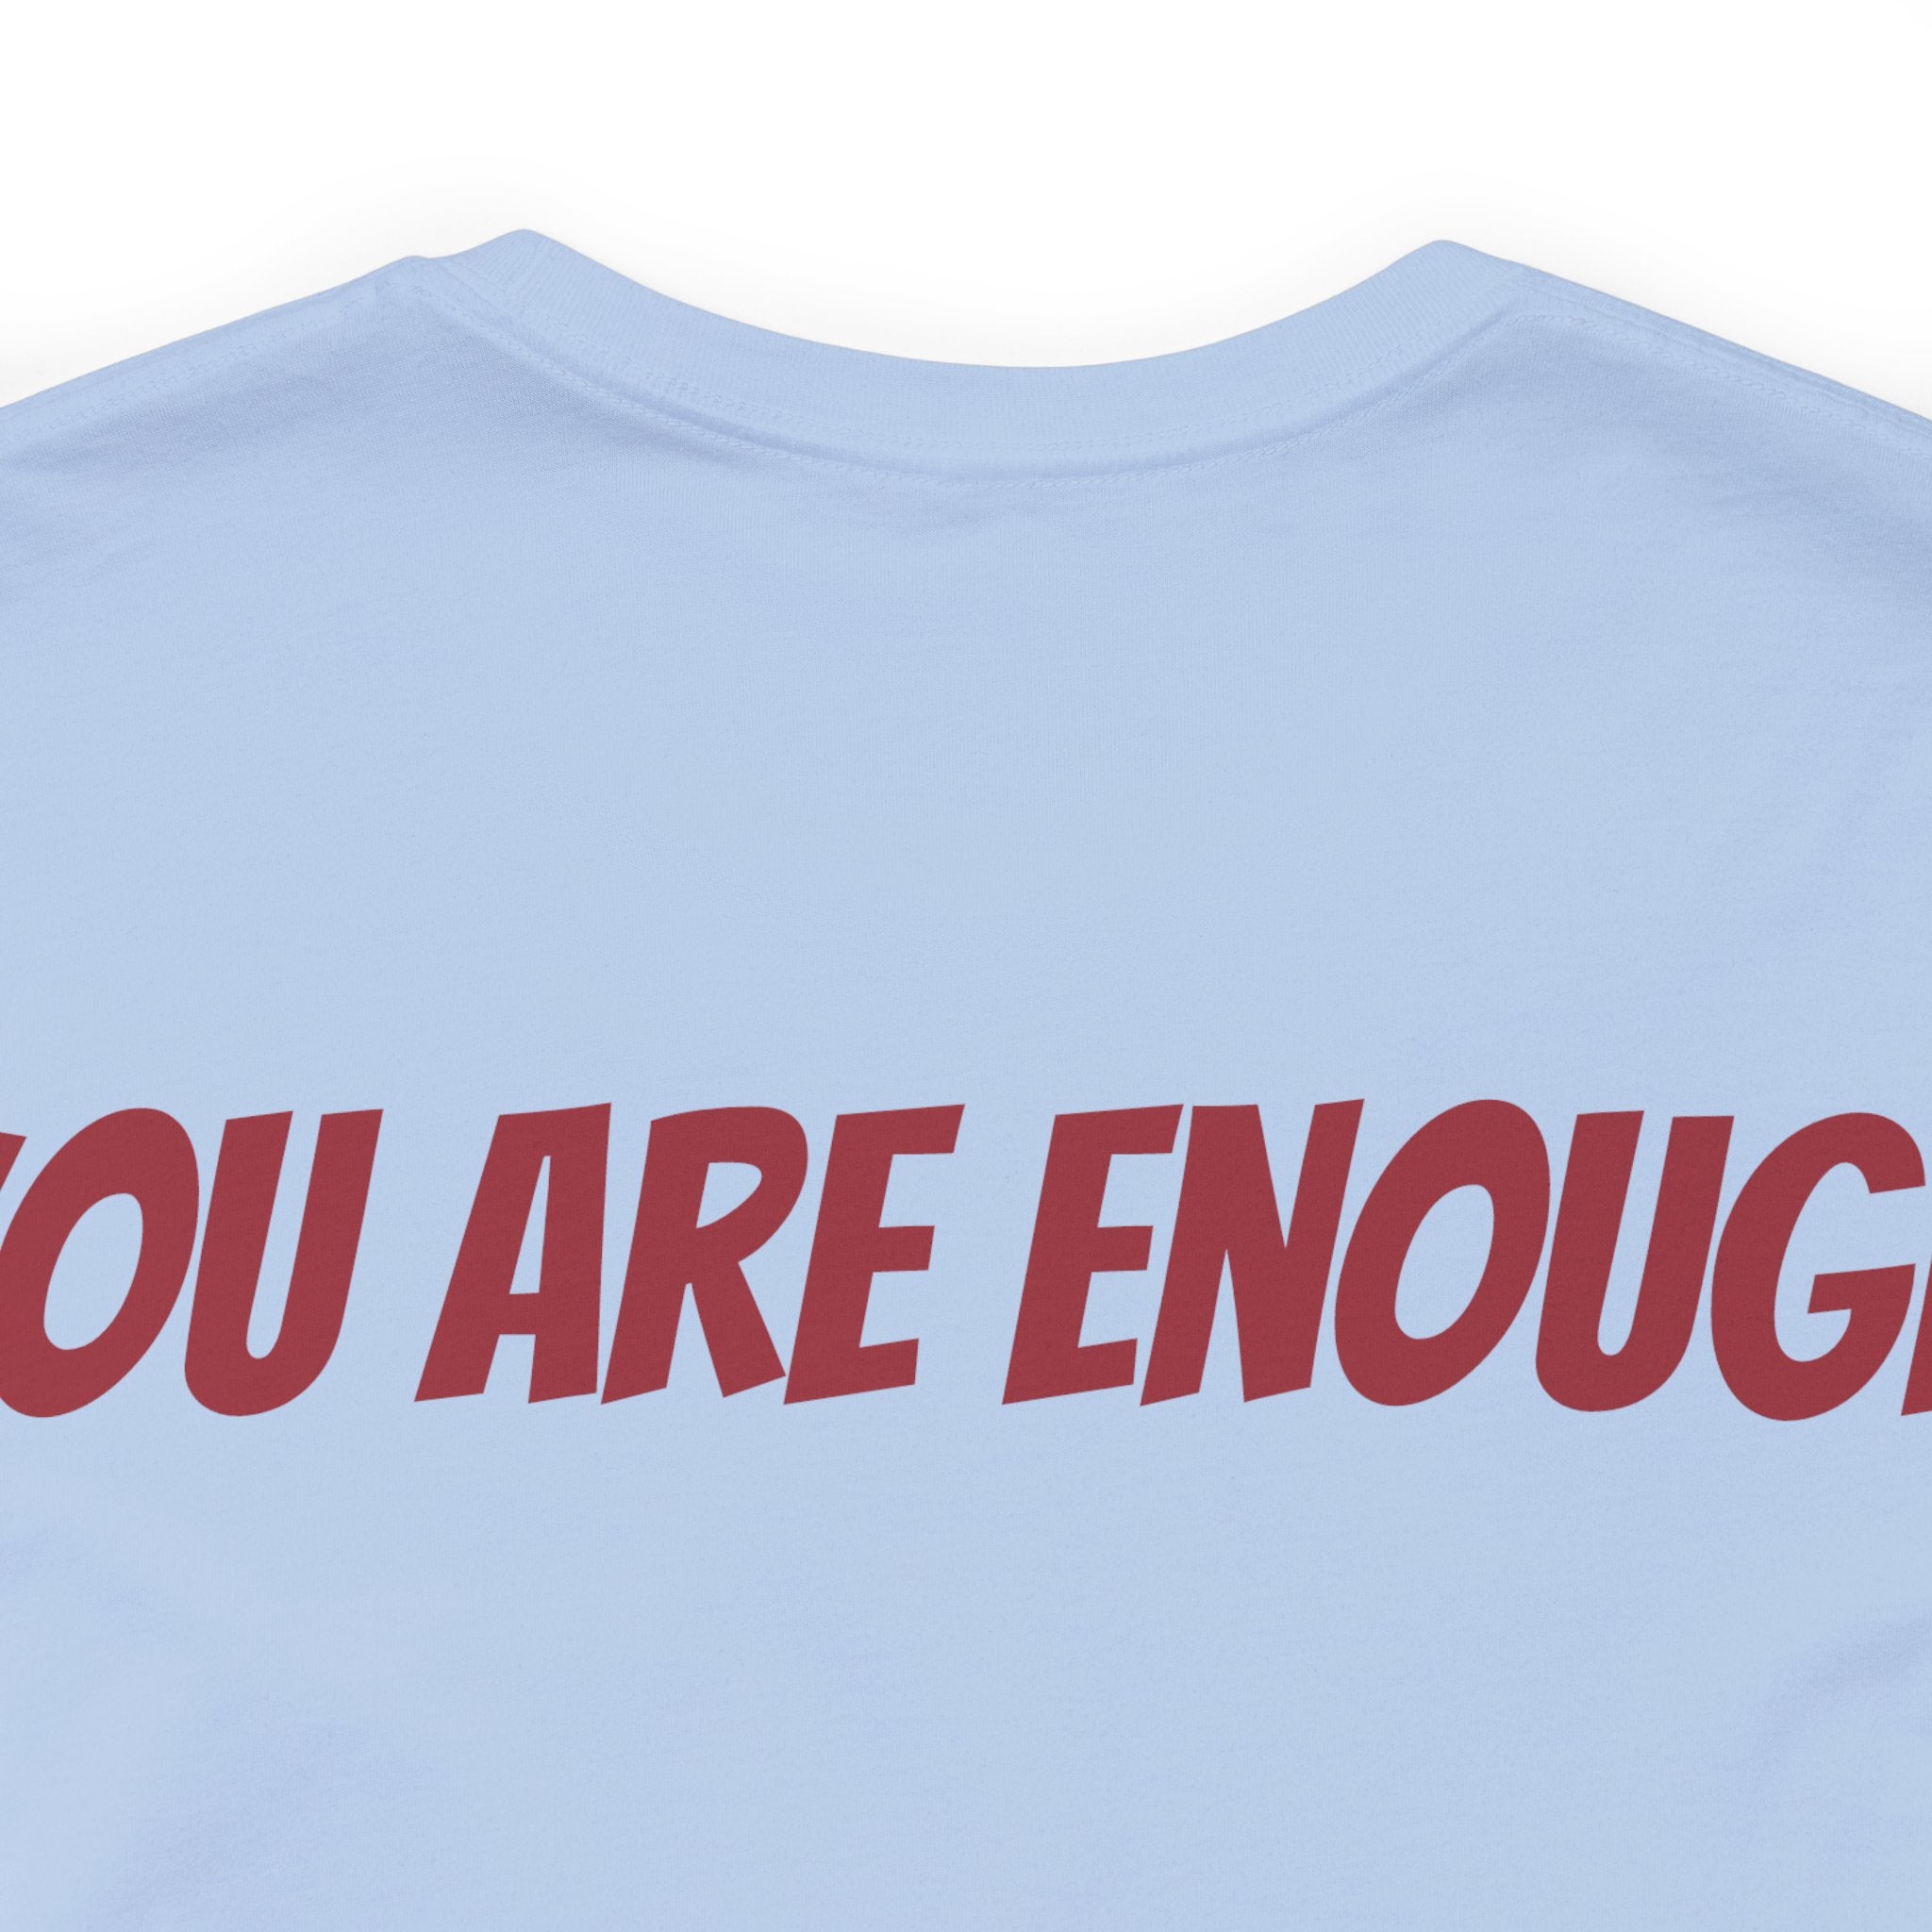 You Are Enough Short Sleeve Tee Bella+Canvas 3001 Baby Blue Airlume Cotton Bella+Canvas 3001 Crew Neckline Jersey Short Sleeve Lightweight Fabric Mental Health Support Retail Fit Tear-away Label Tee Unisex Tee T-Shirt 2275277530872120571_2048 Printify